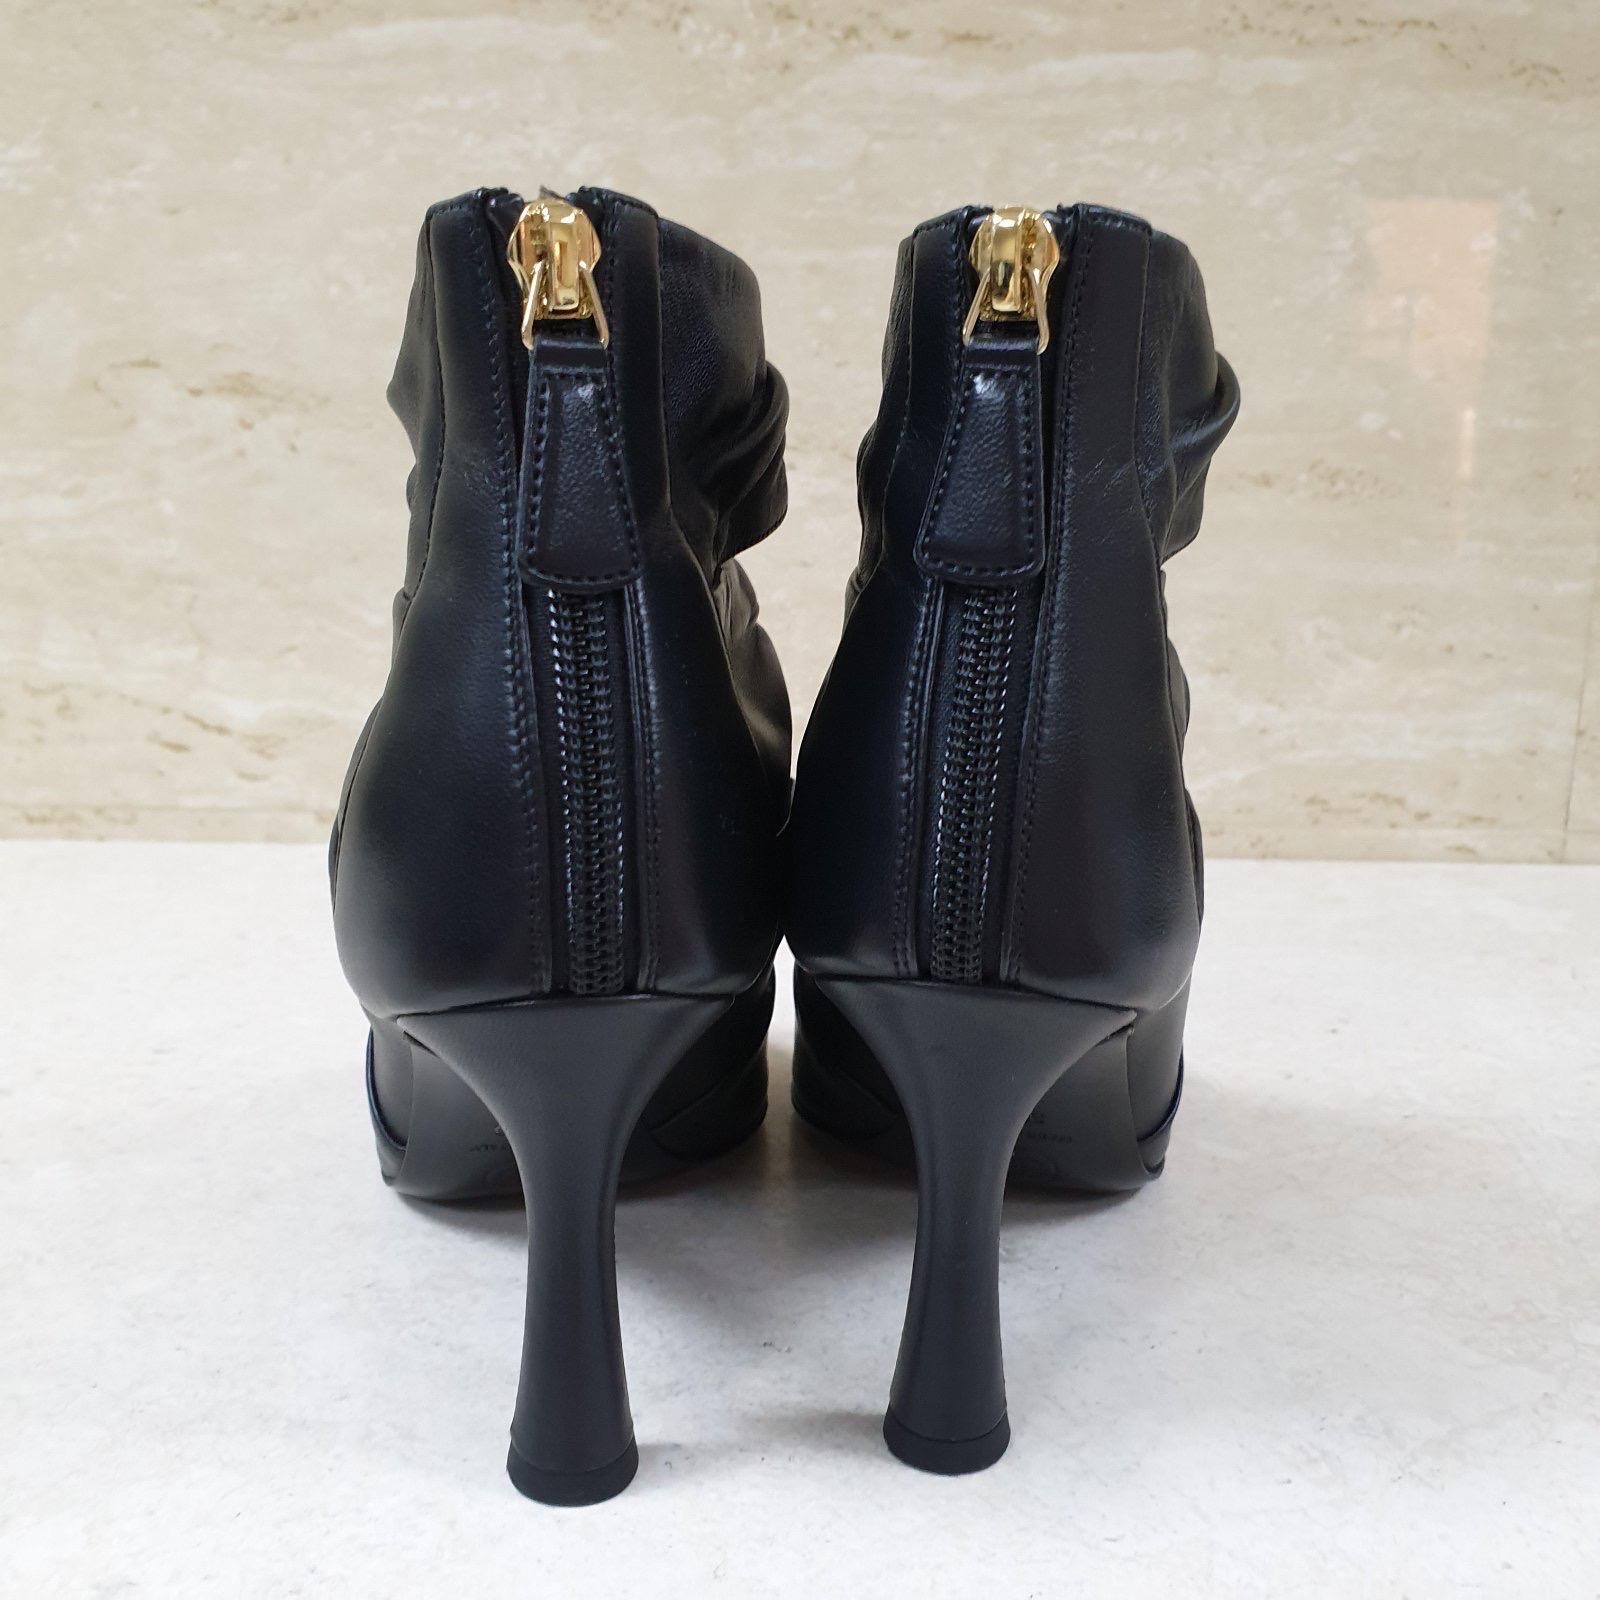 Chanel Black Leather Open Toe Bow CC Boots Booties Heels 3